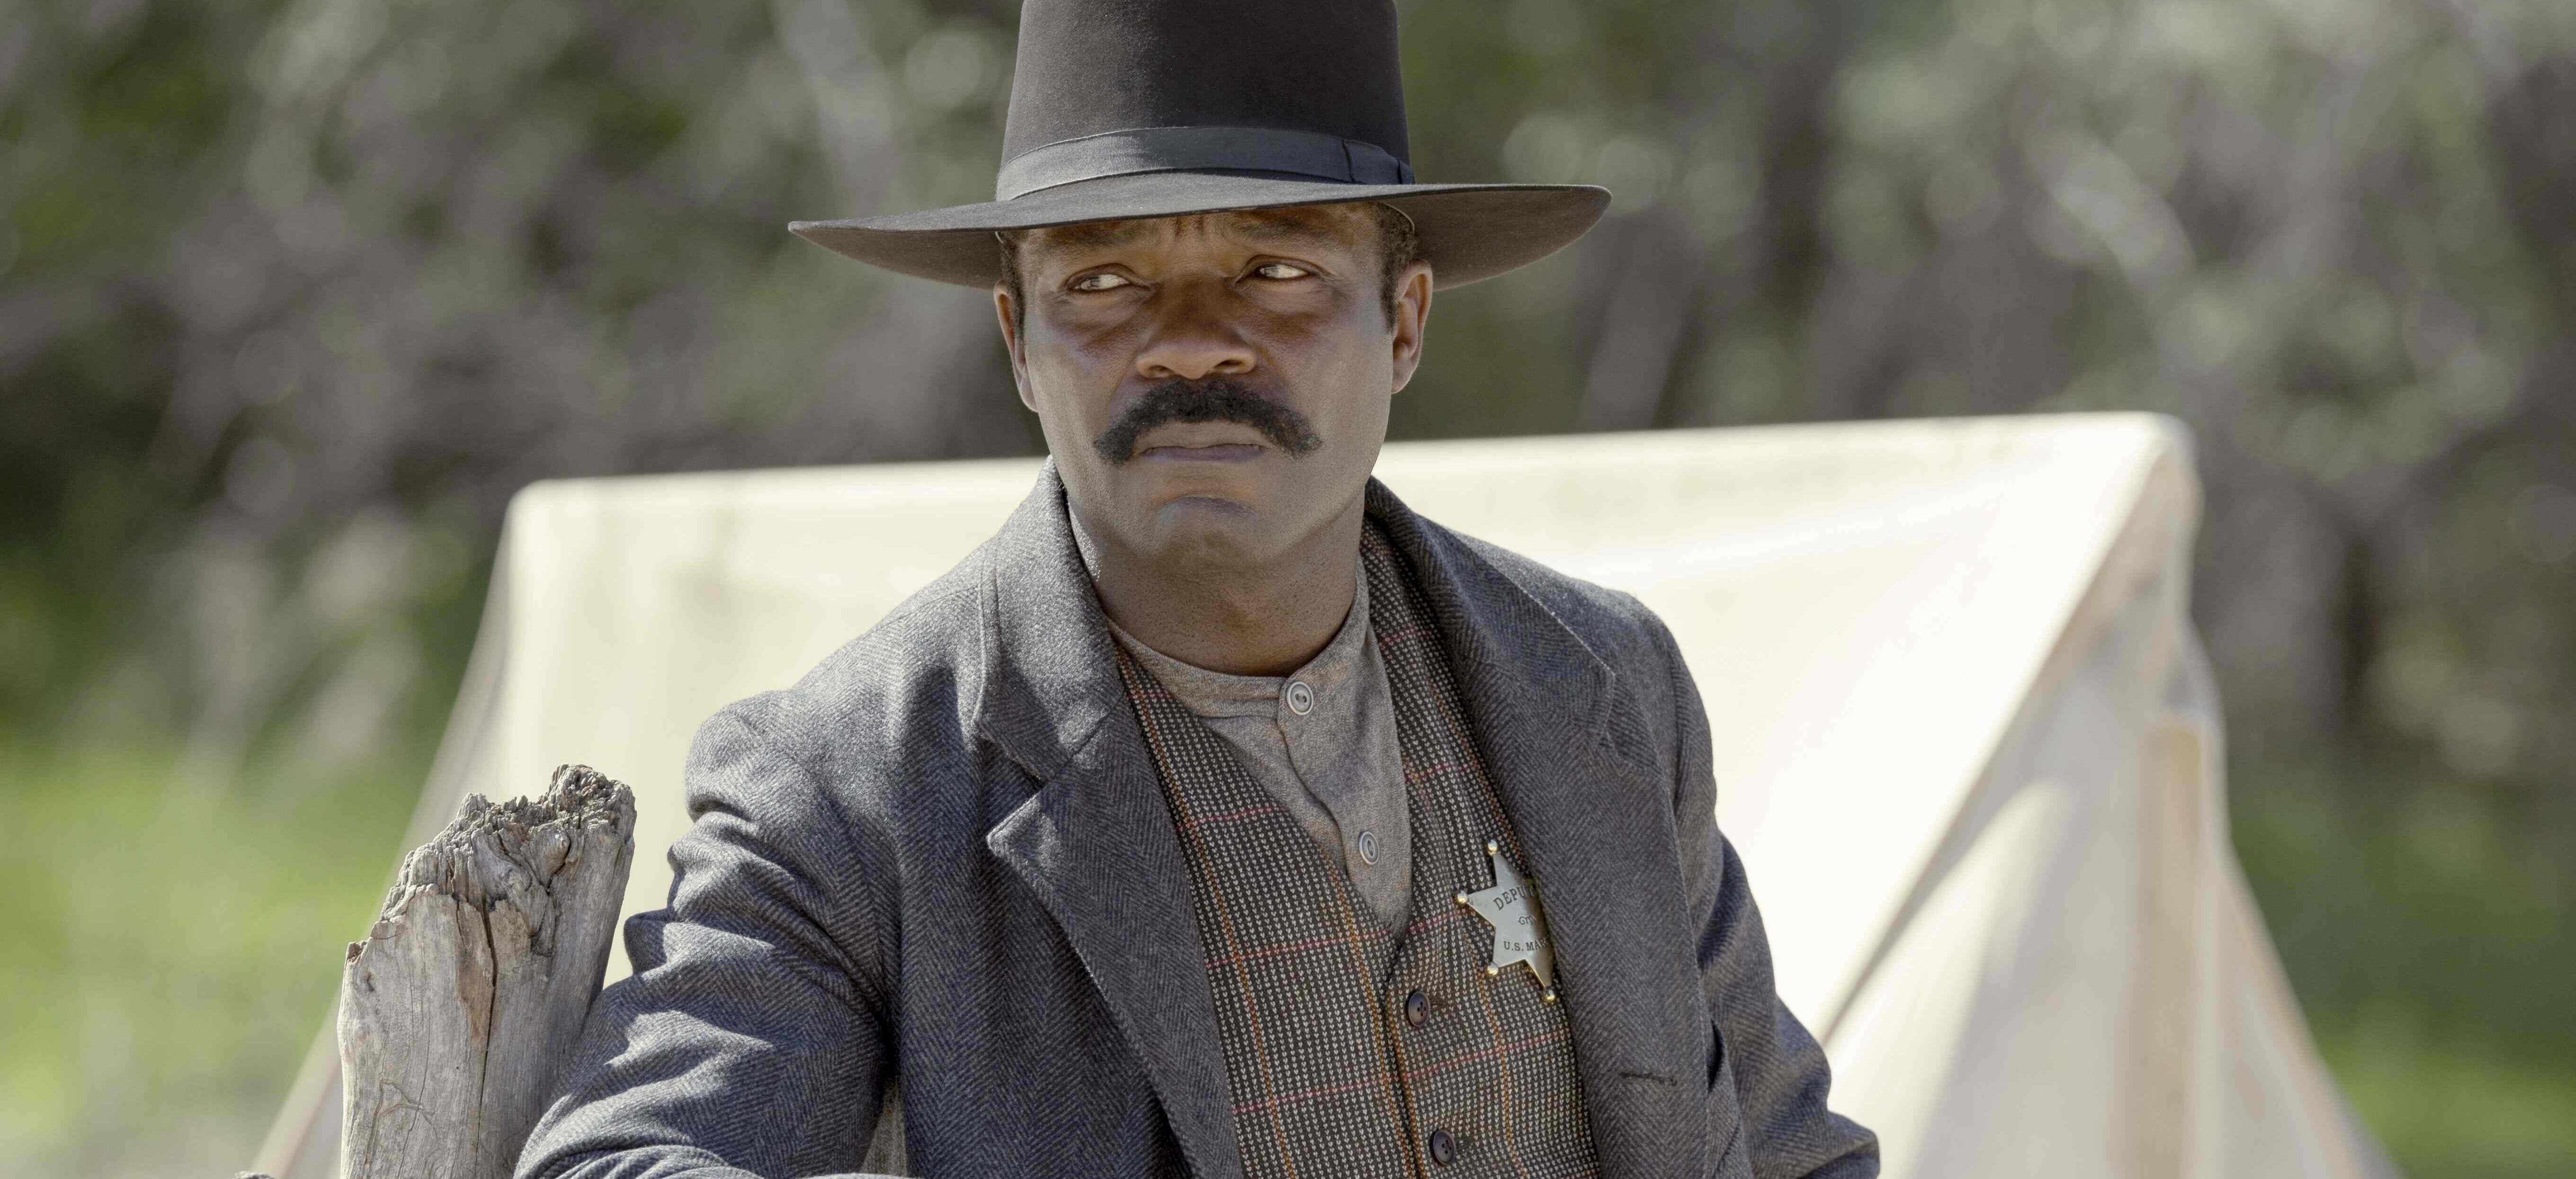 Liked Lawmen Bass Reeves? Don’t Miss These 8 Similar Shows